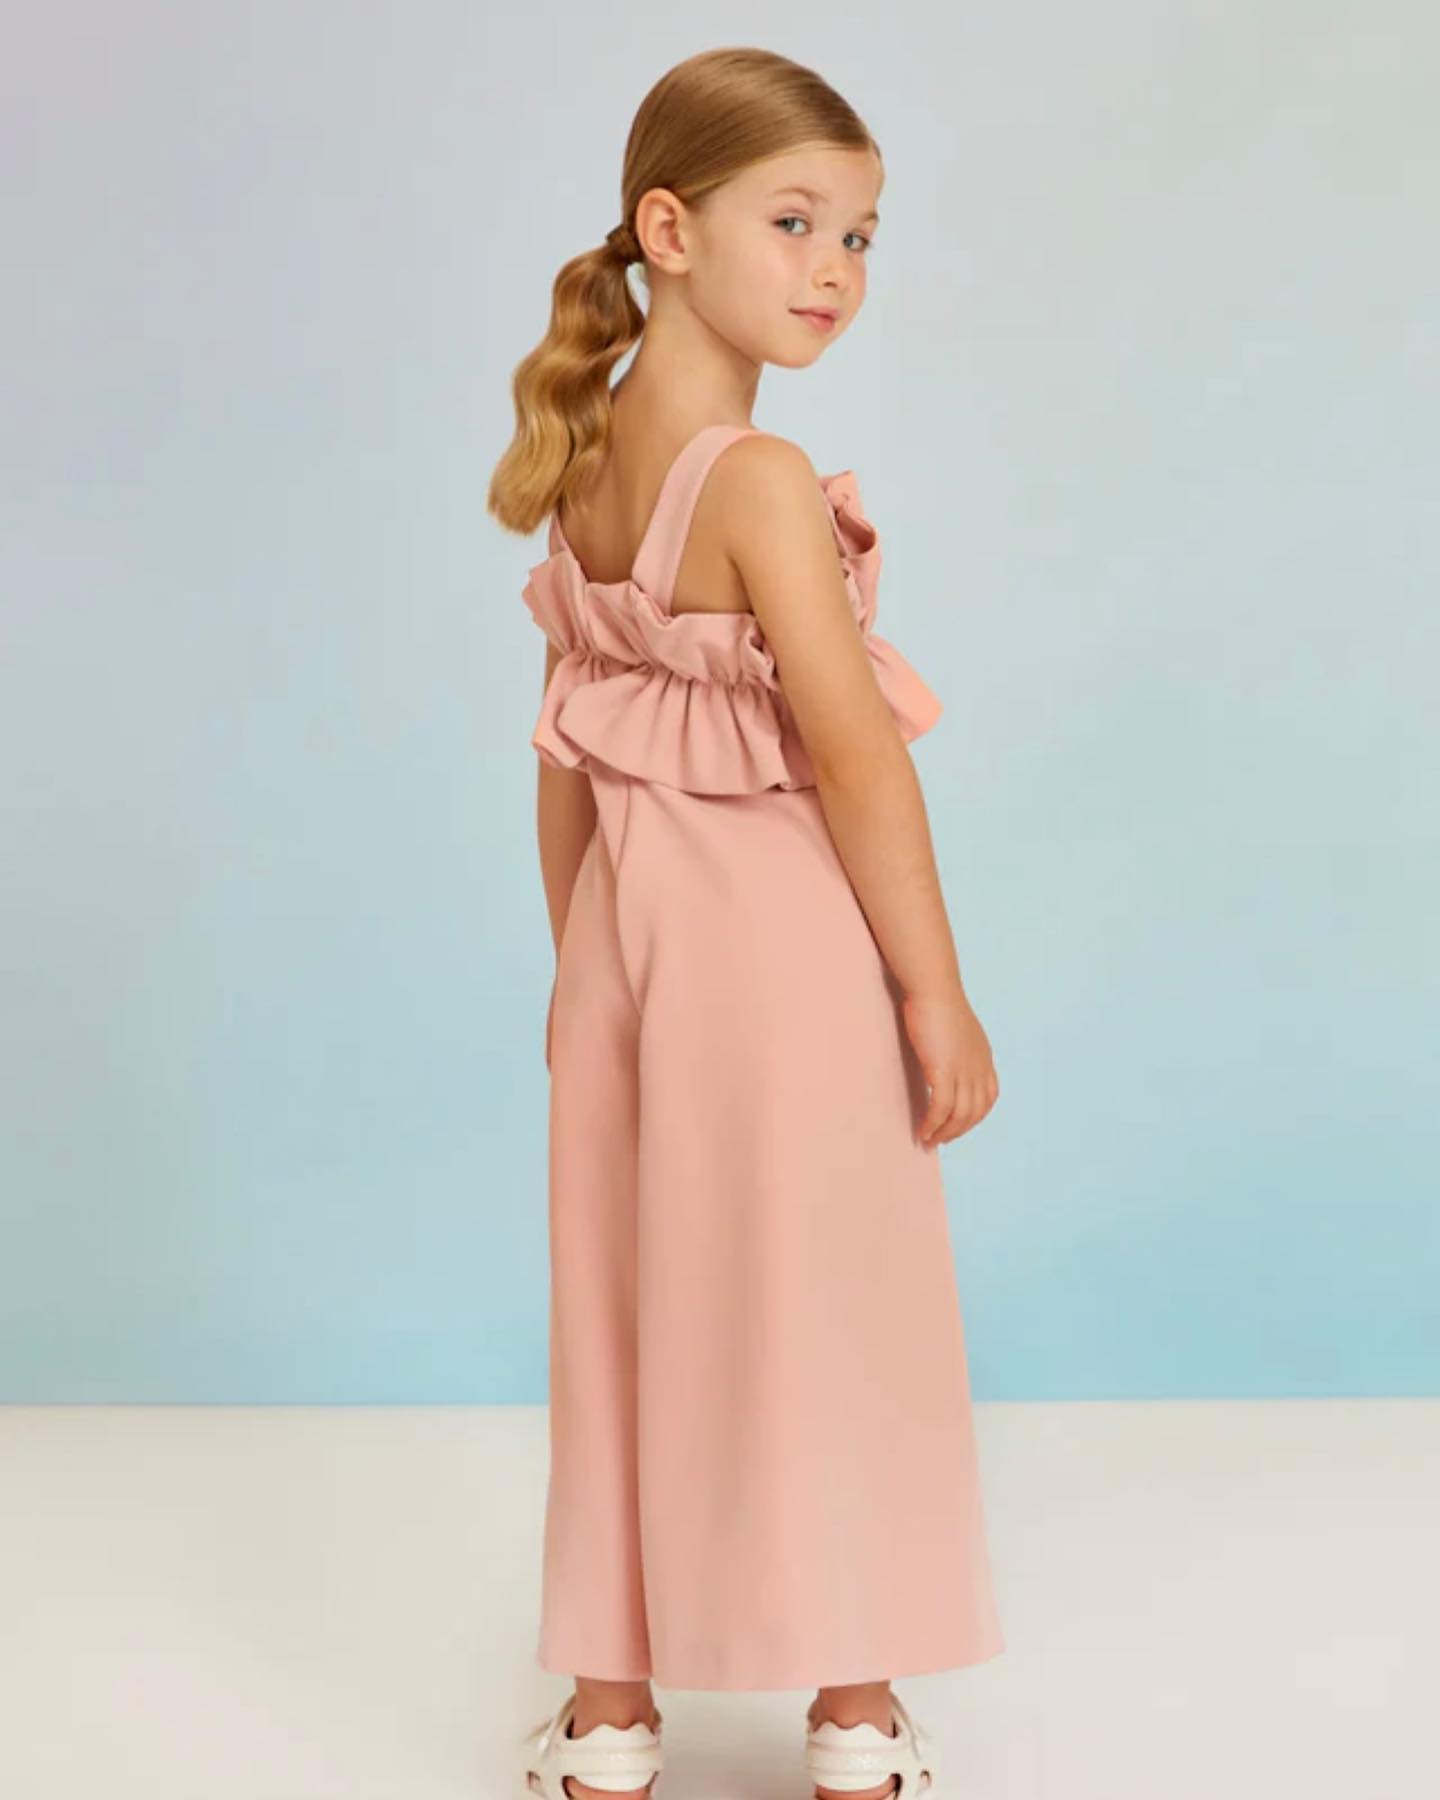 A young girl looks over her shoulder while wearing a light pink jumpsuit from Hunter & Shaye.